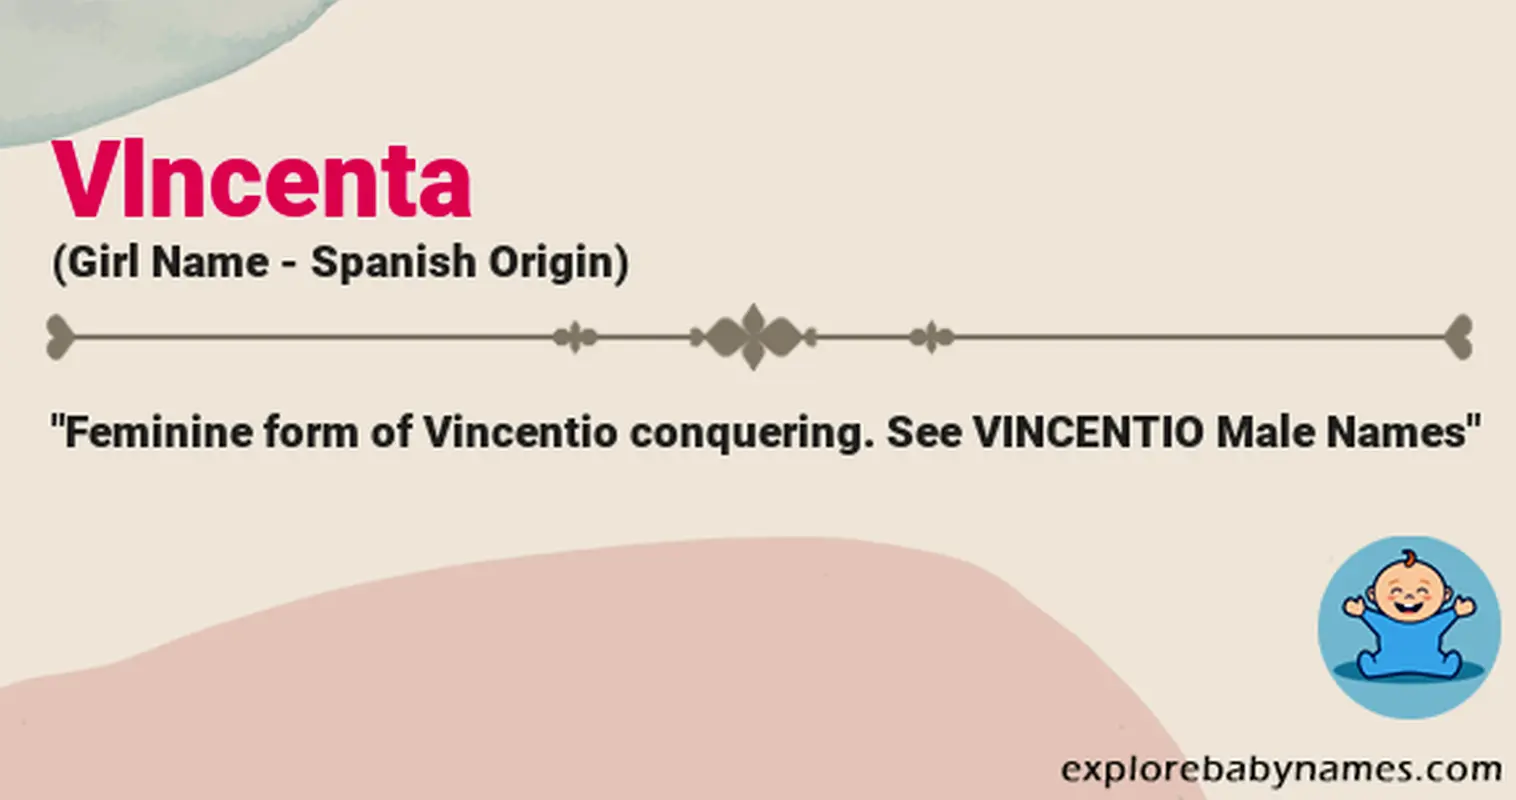 Meaning of Vlncenta